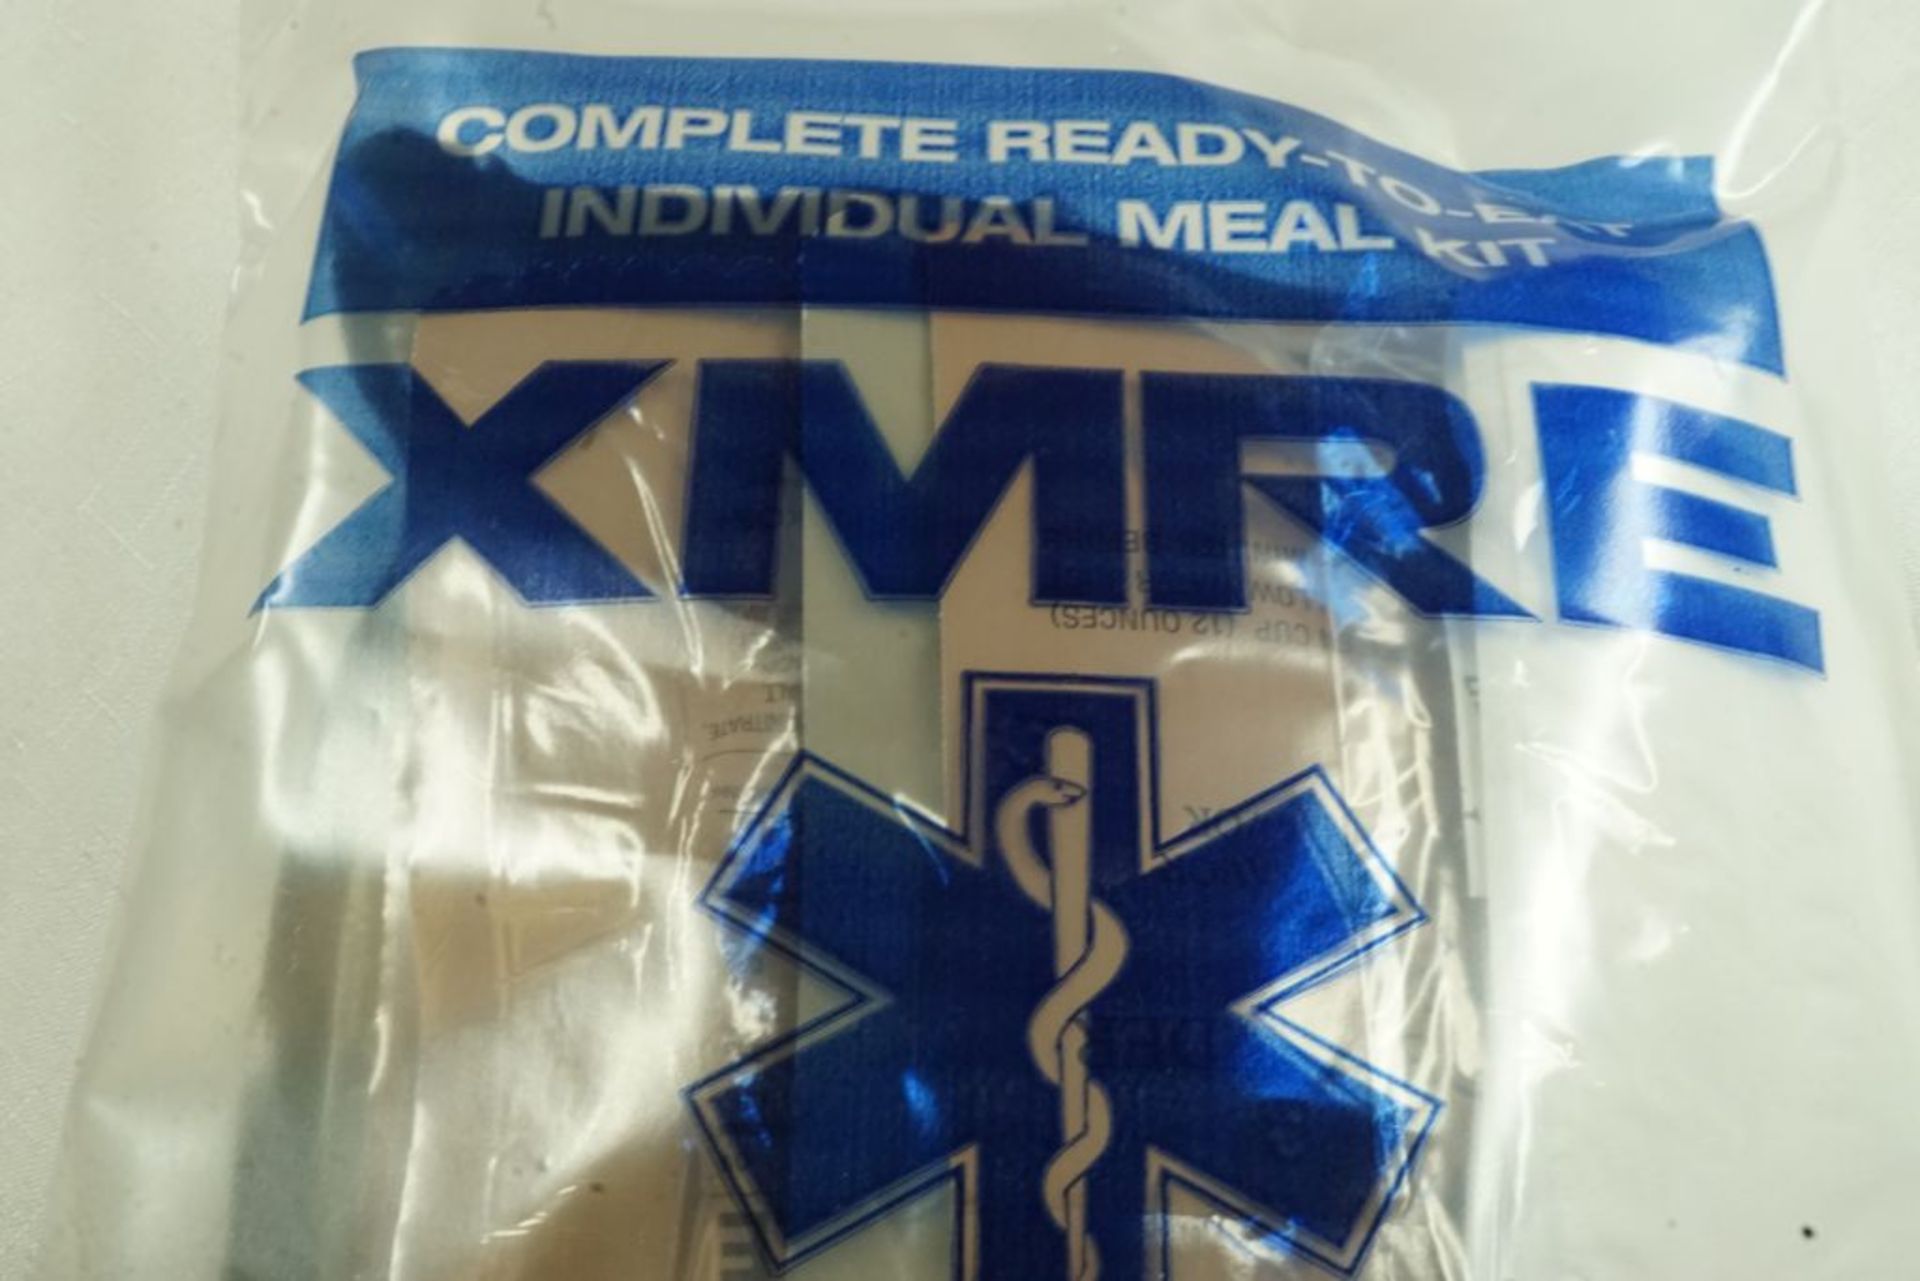 Lot of (48) Cases of XMRE Meals - Extended Shelf Life Meal, Ready to Eat - Image 2 of 16